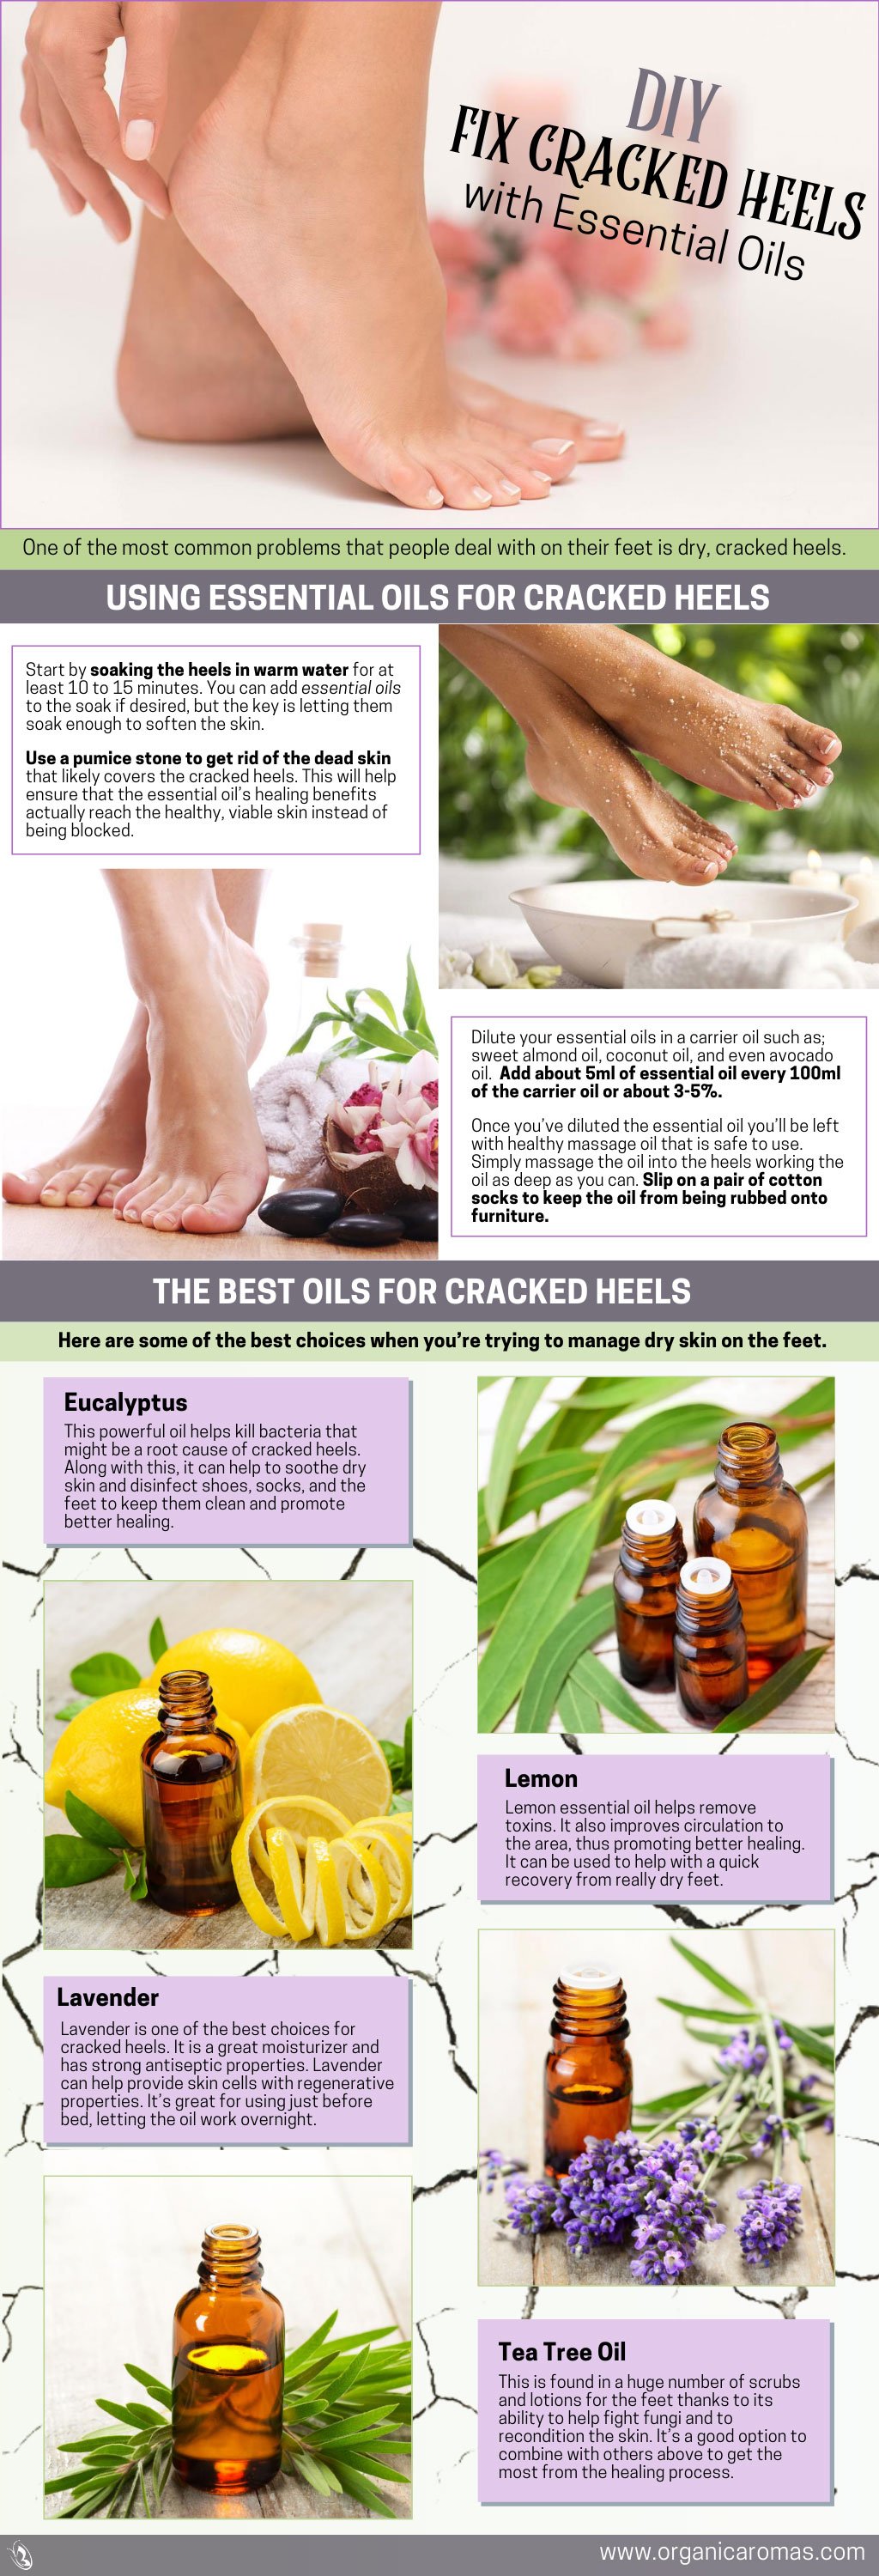 10 Home Remedies for CRACKED HEELS | Magical Cracked Heel Remedies-Dr. Amee  Daxini | Doctors' Circle - YouTube